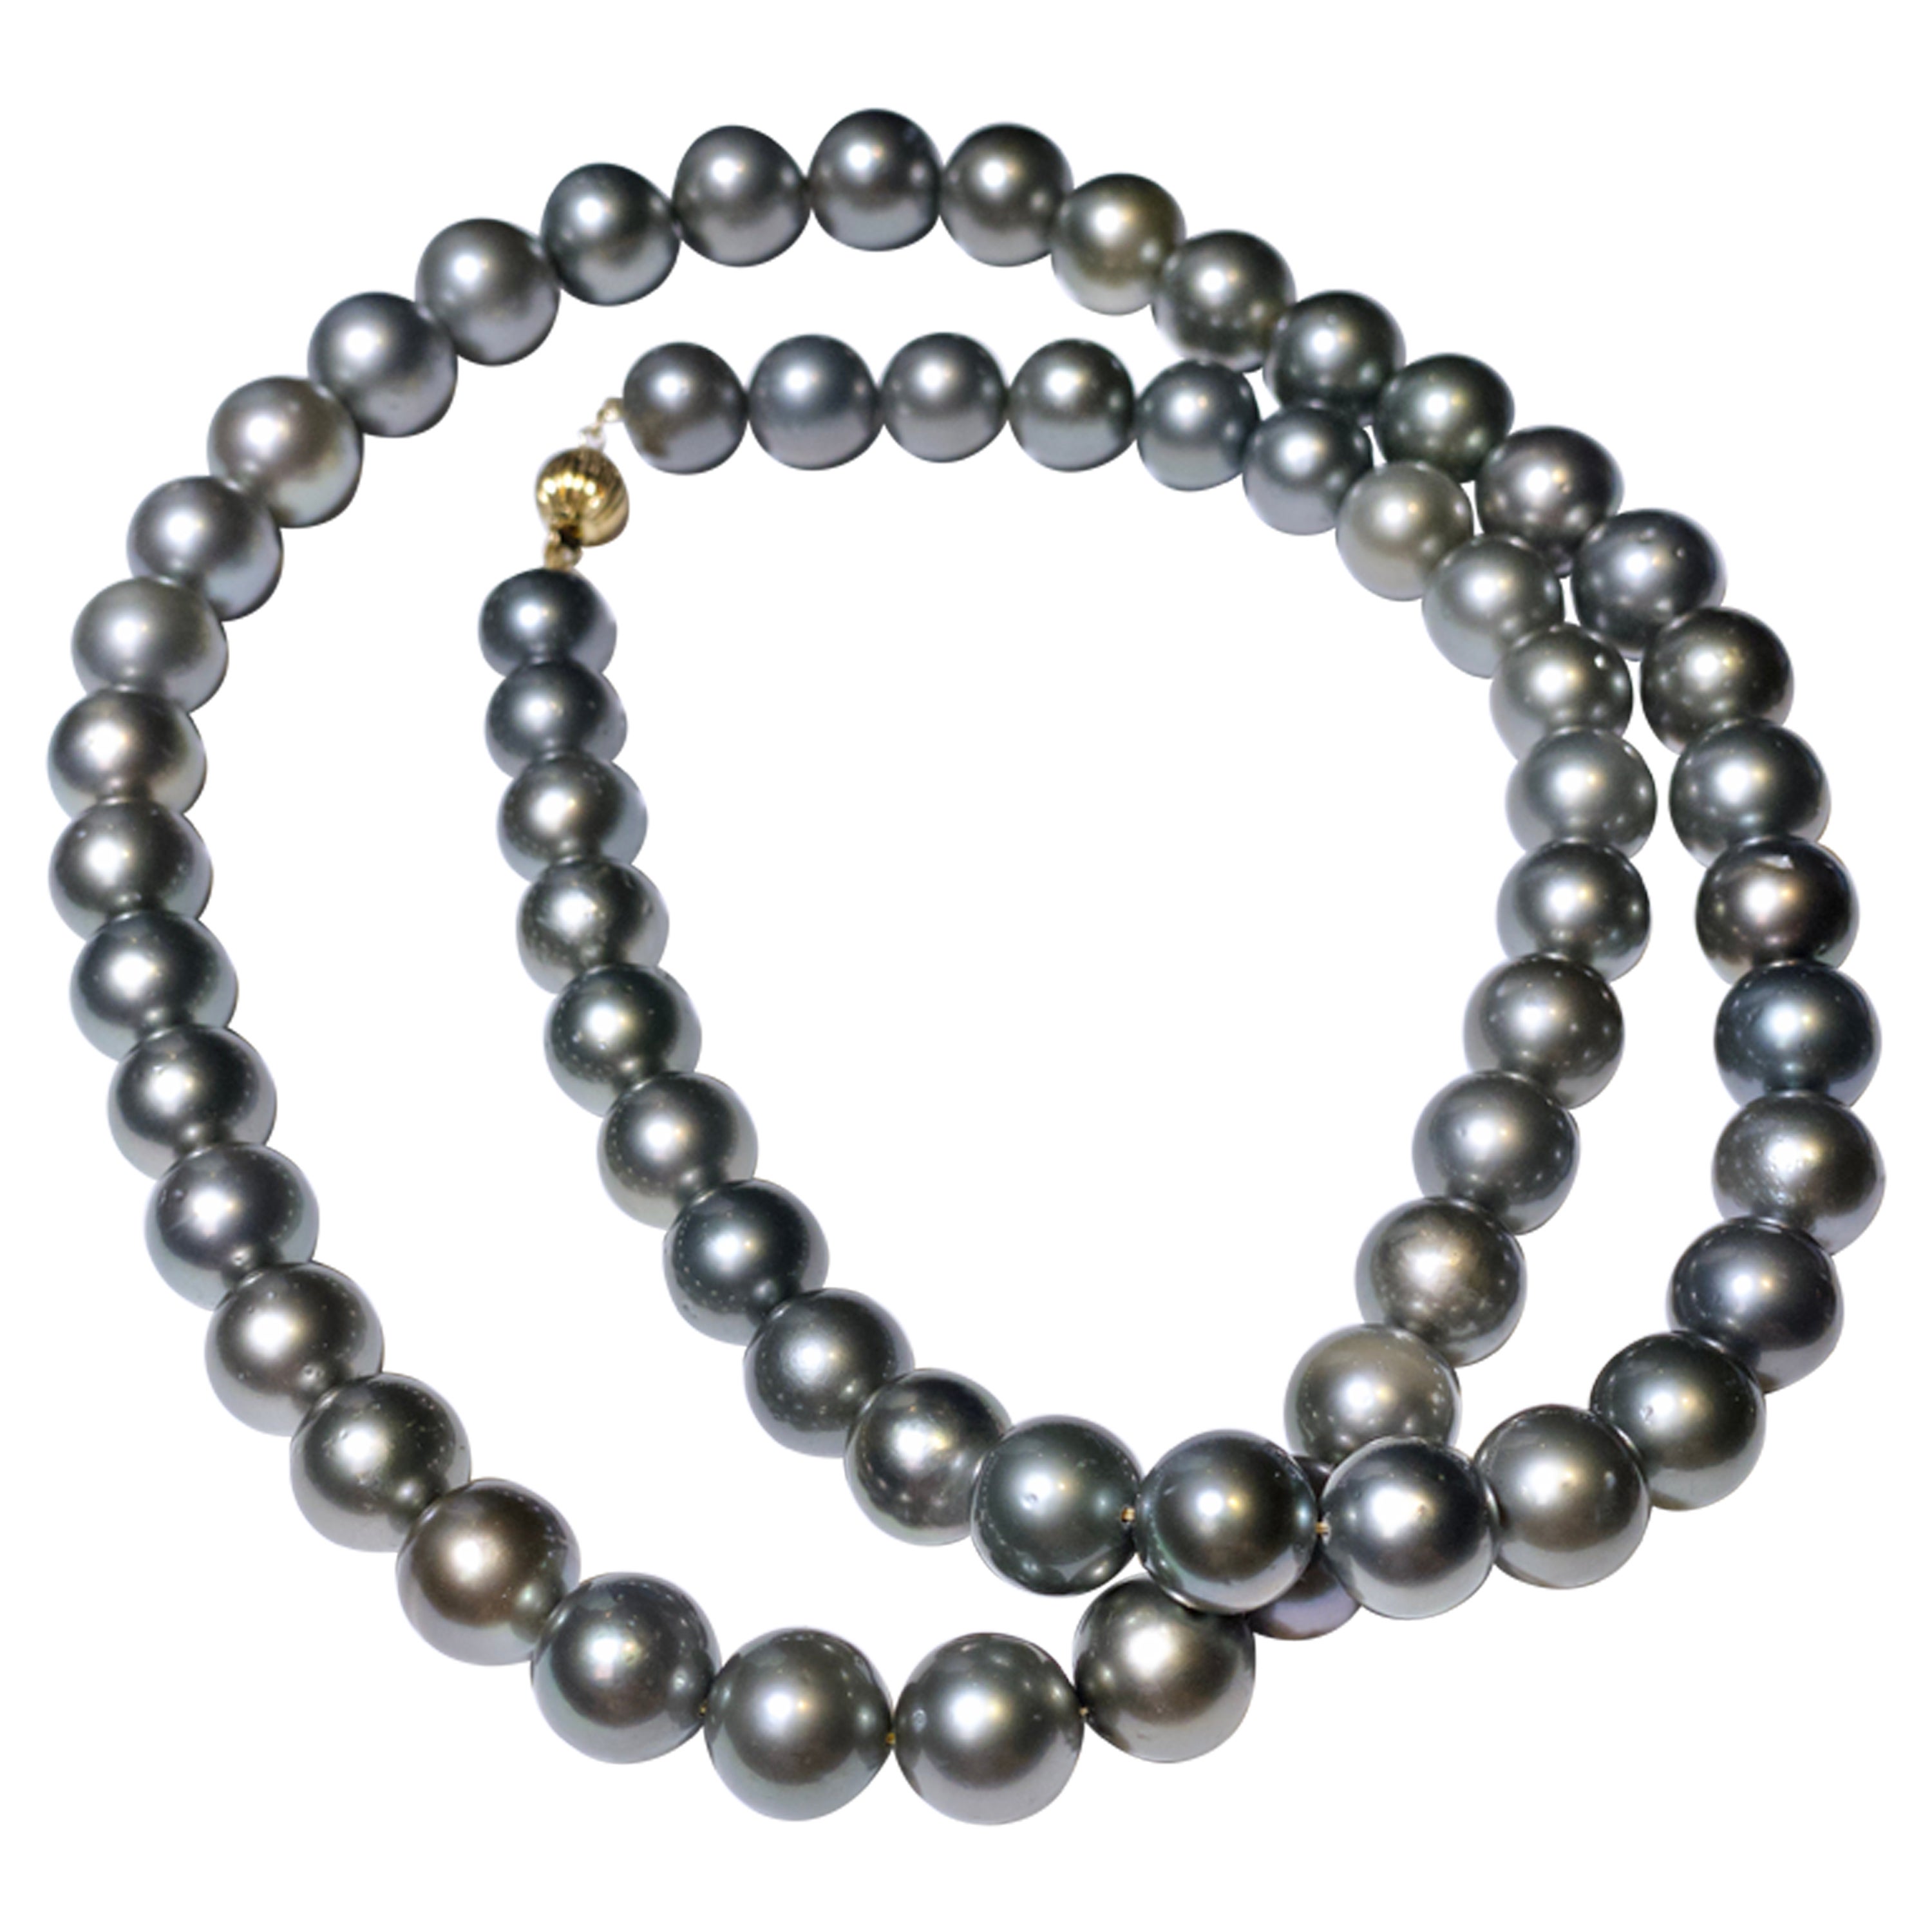 Grey Colour Silver Tone Tahitian Pearl Necklace with 18k Gold Clasp For Sale